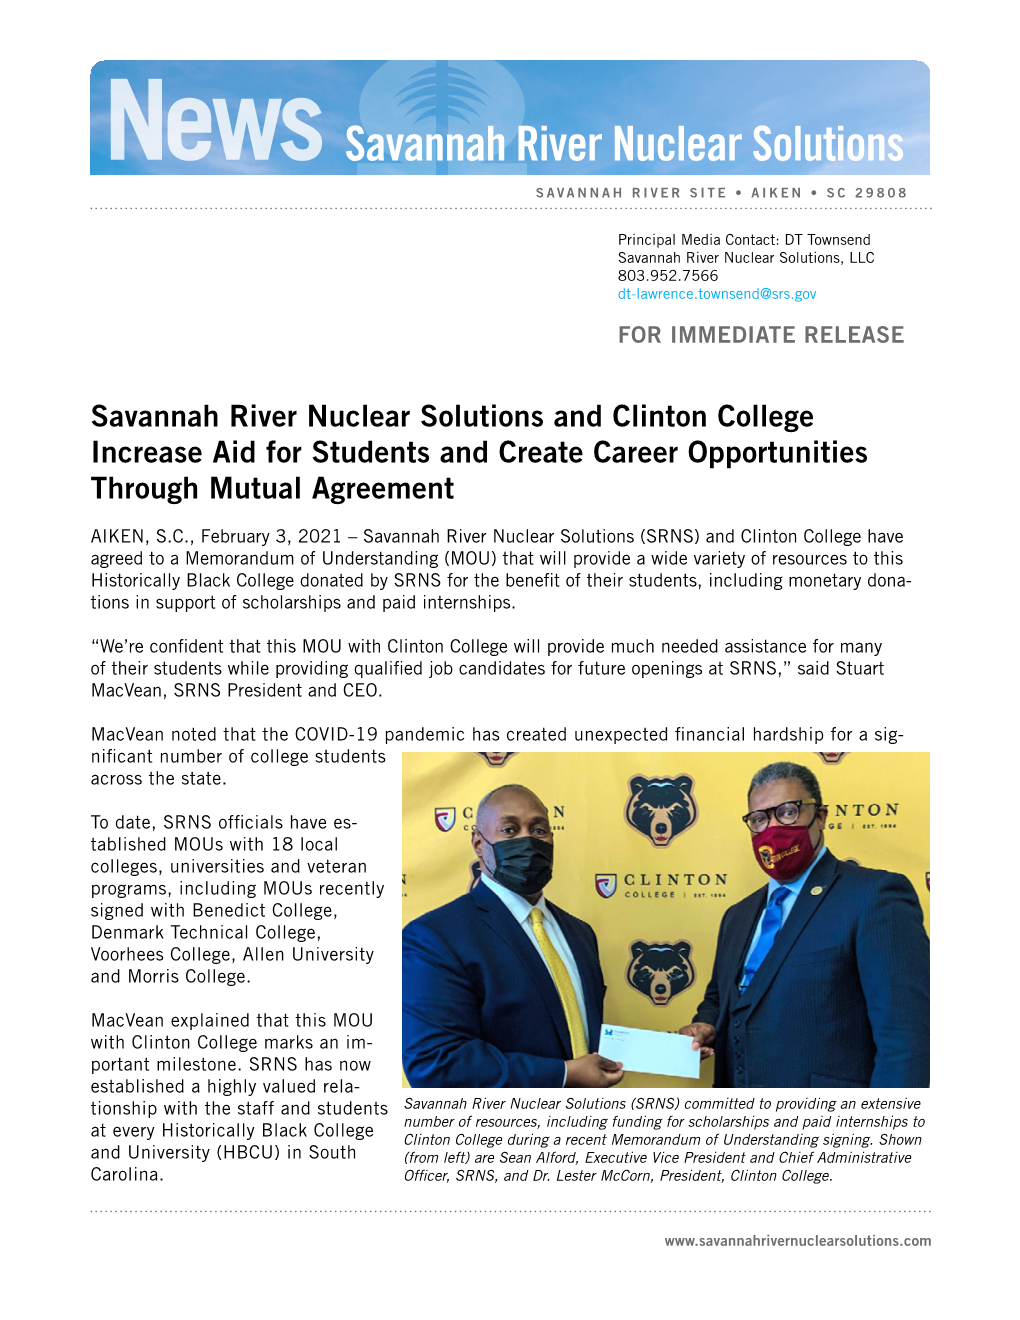 SRNS and Clinton College Increase Aid for Students and Create Career Opportunities Through Mutual Agreement